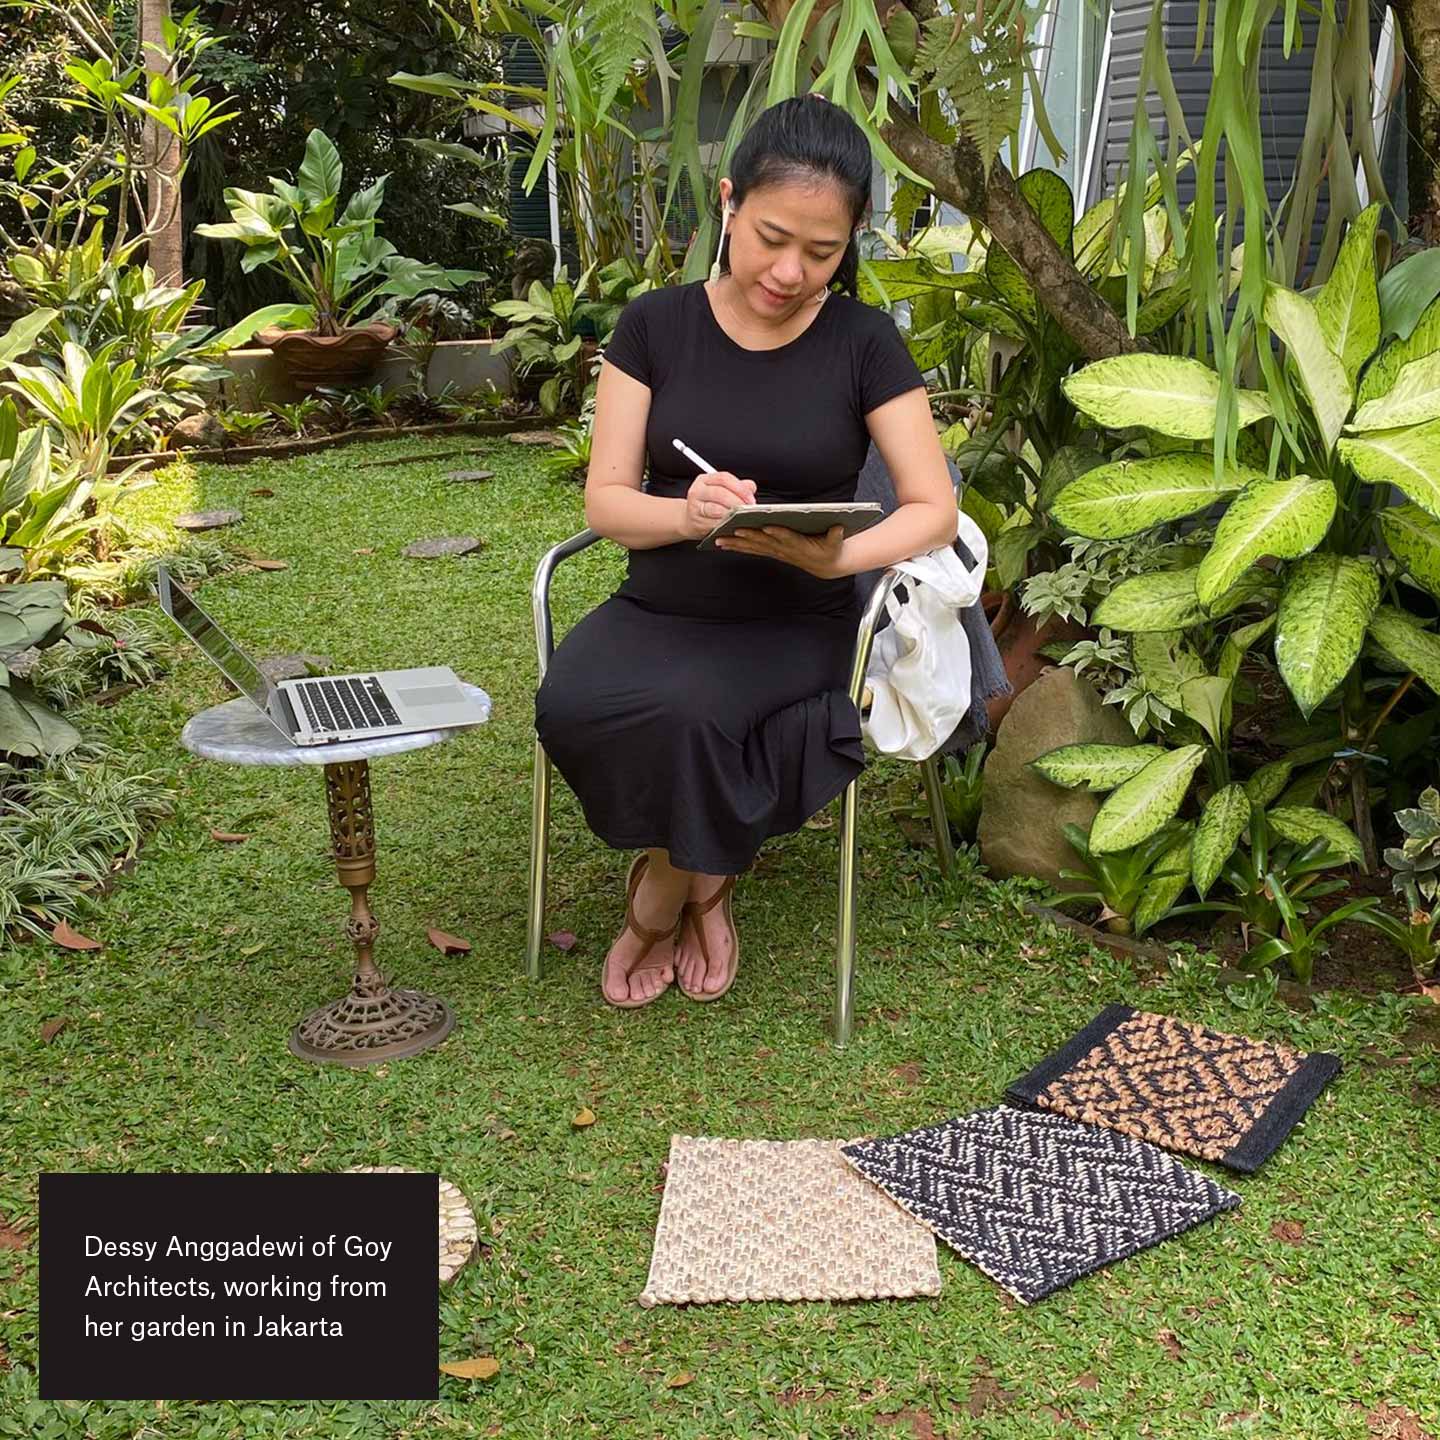 Dessy Anggadewi of Goy Architects, working from her garden in Jakarta